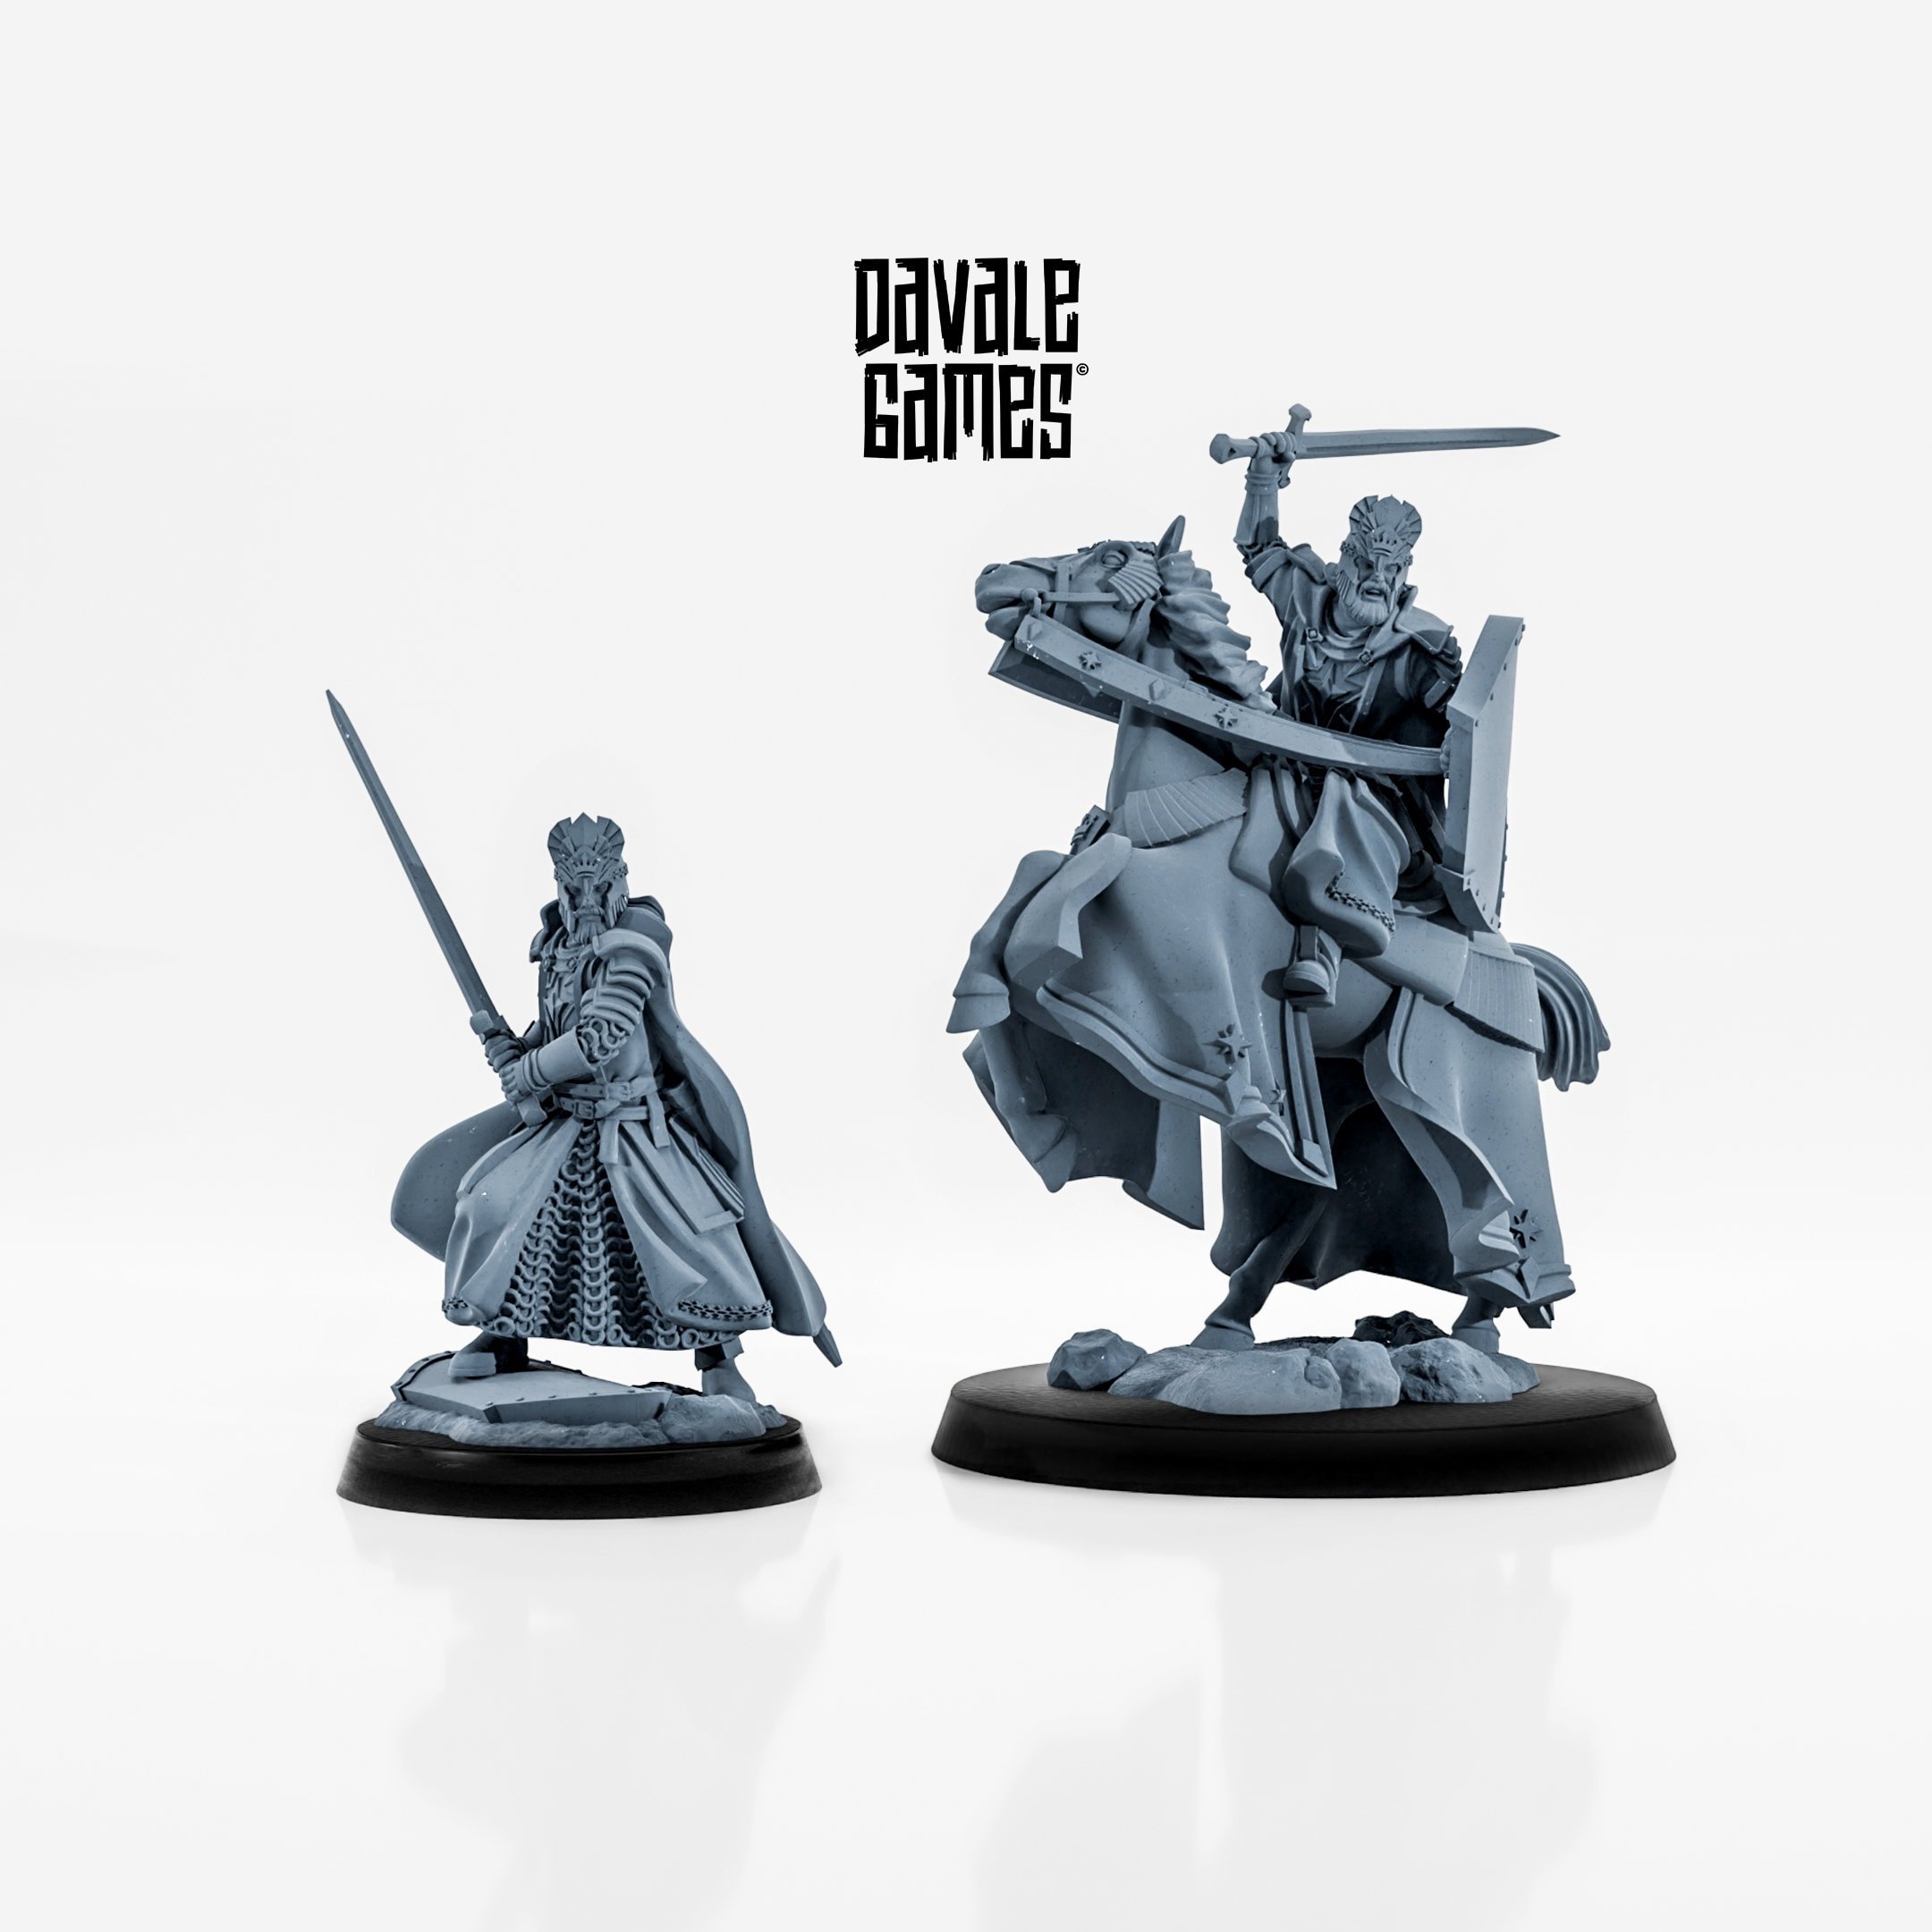 Dragon Army Warriors with Pikes wargaming miniatures designed by Davale Games 3D Printed by Forgemaster Miniatures